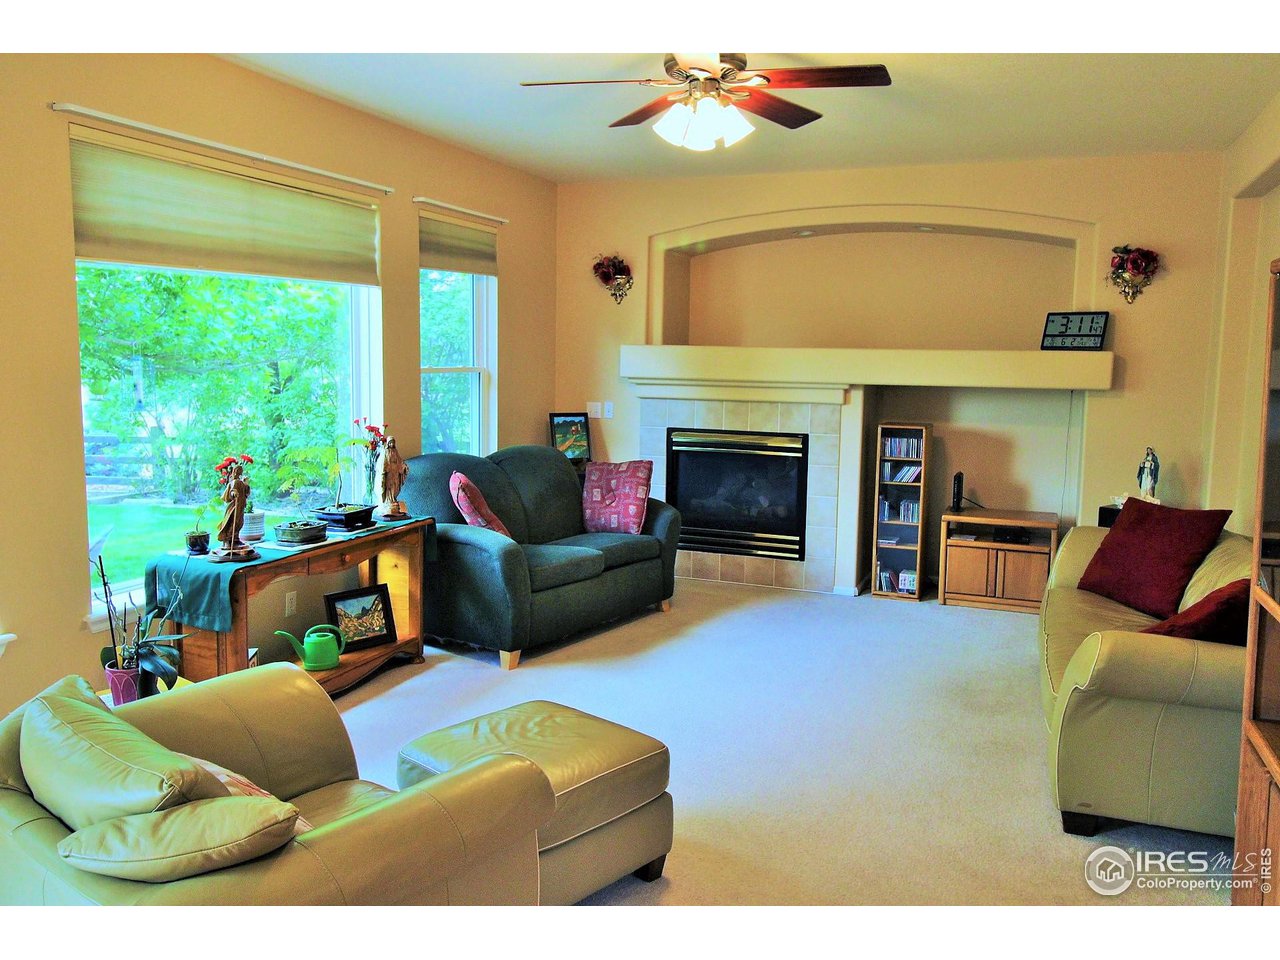 Big family room on main level with gas fireplace and ceiling fan, upgraded windows looking into back yard.